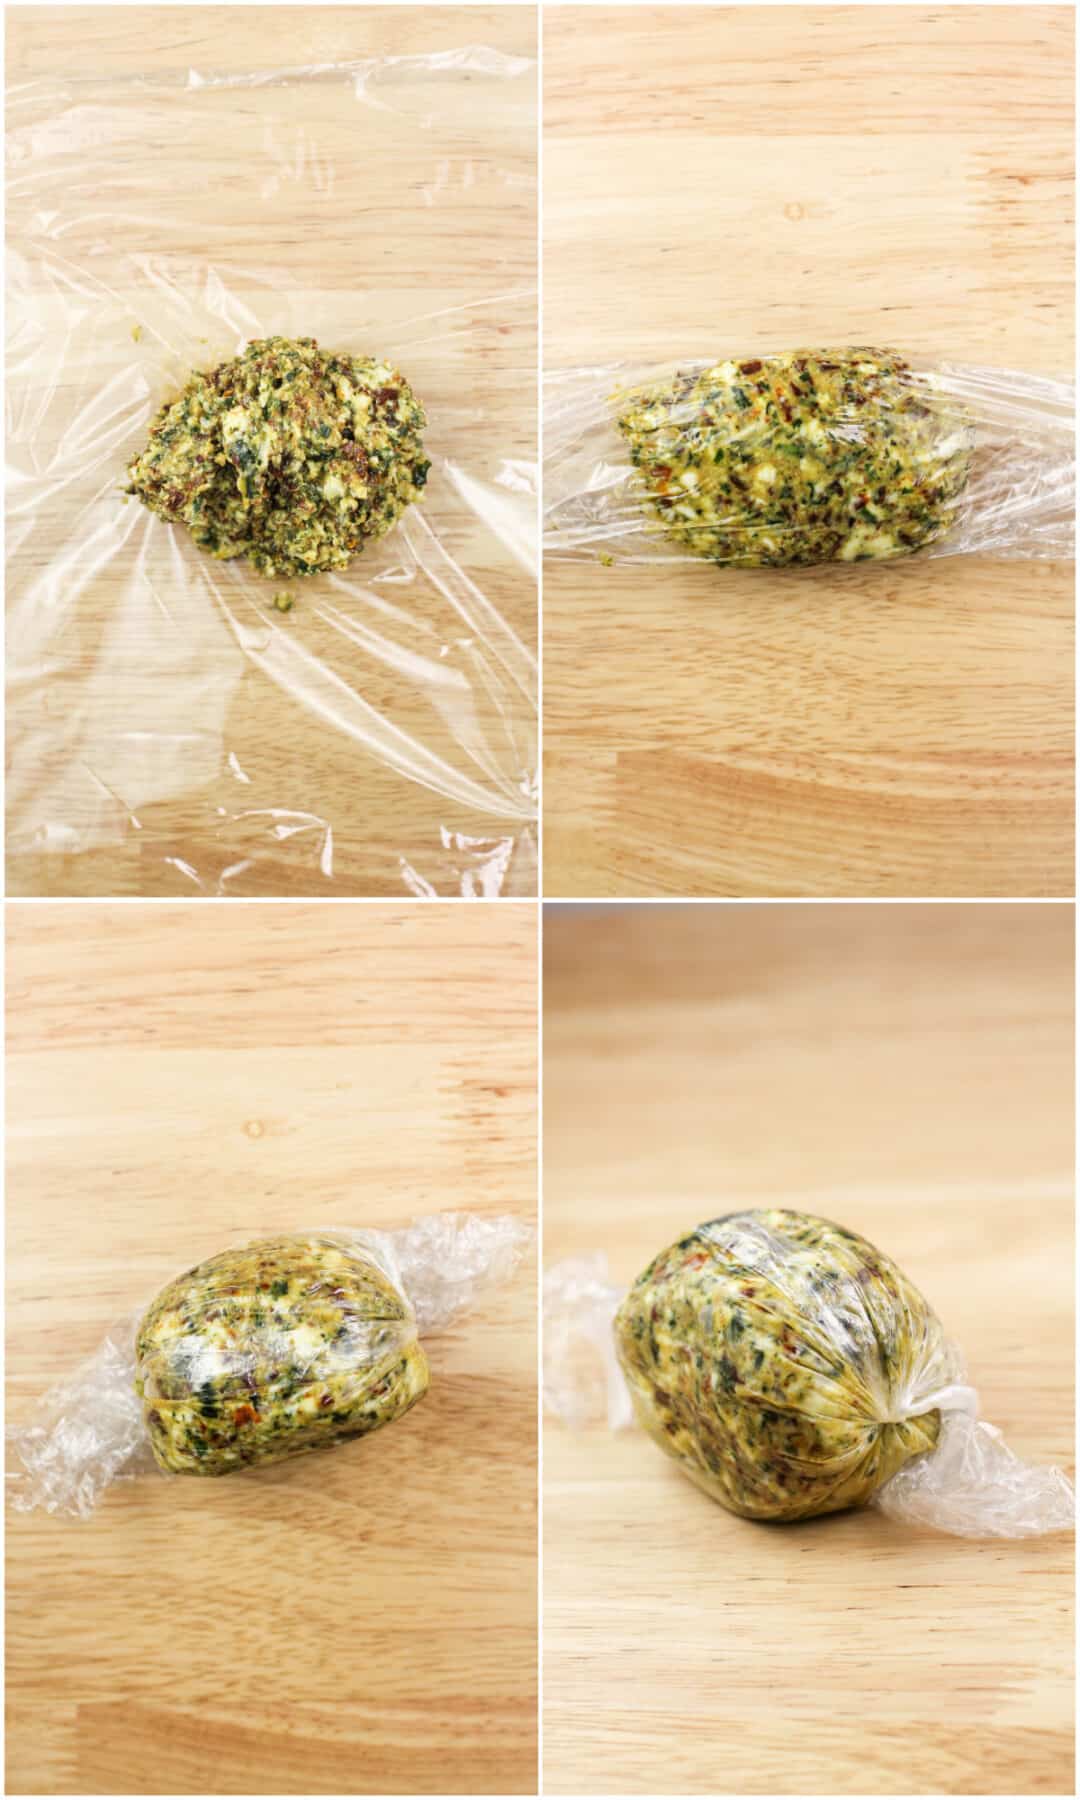 collage of 4 photos showing the progression of wrapping compound butter in plastic wrap